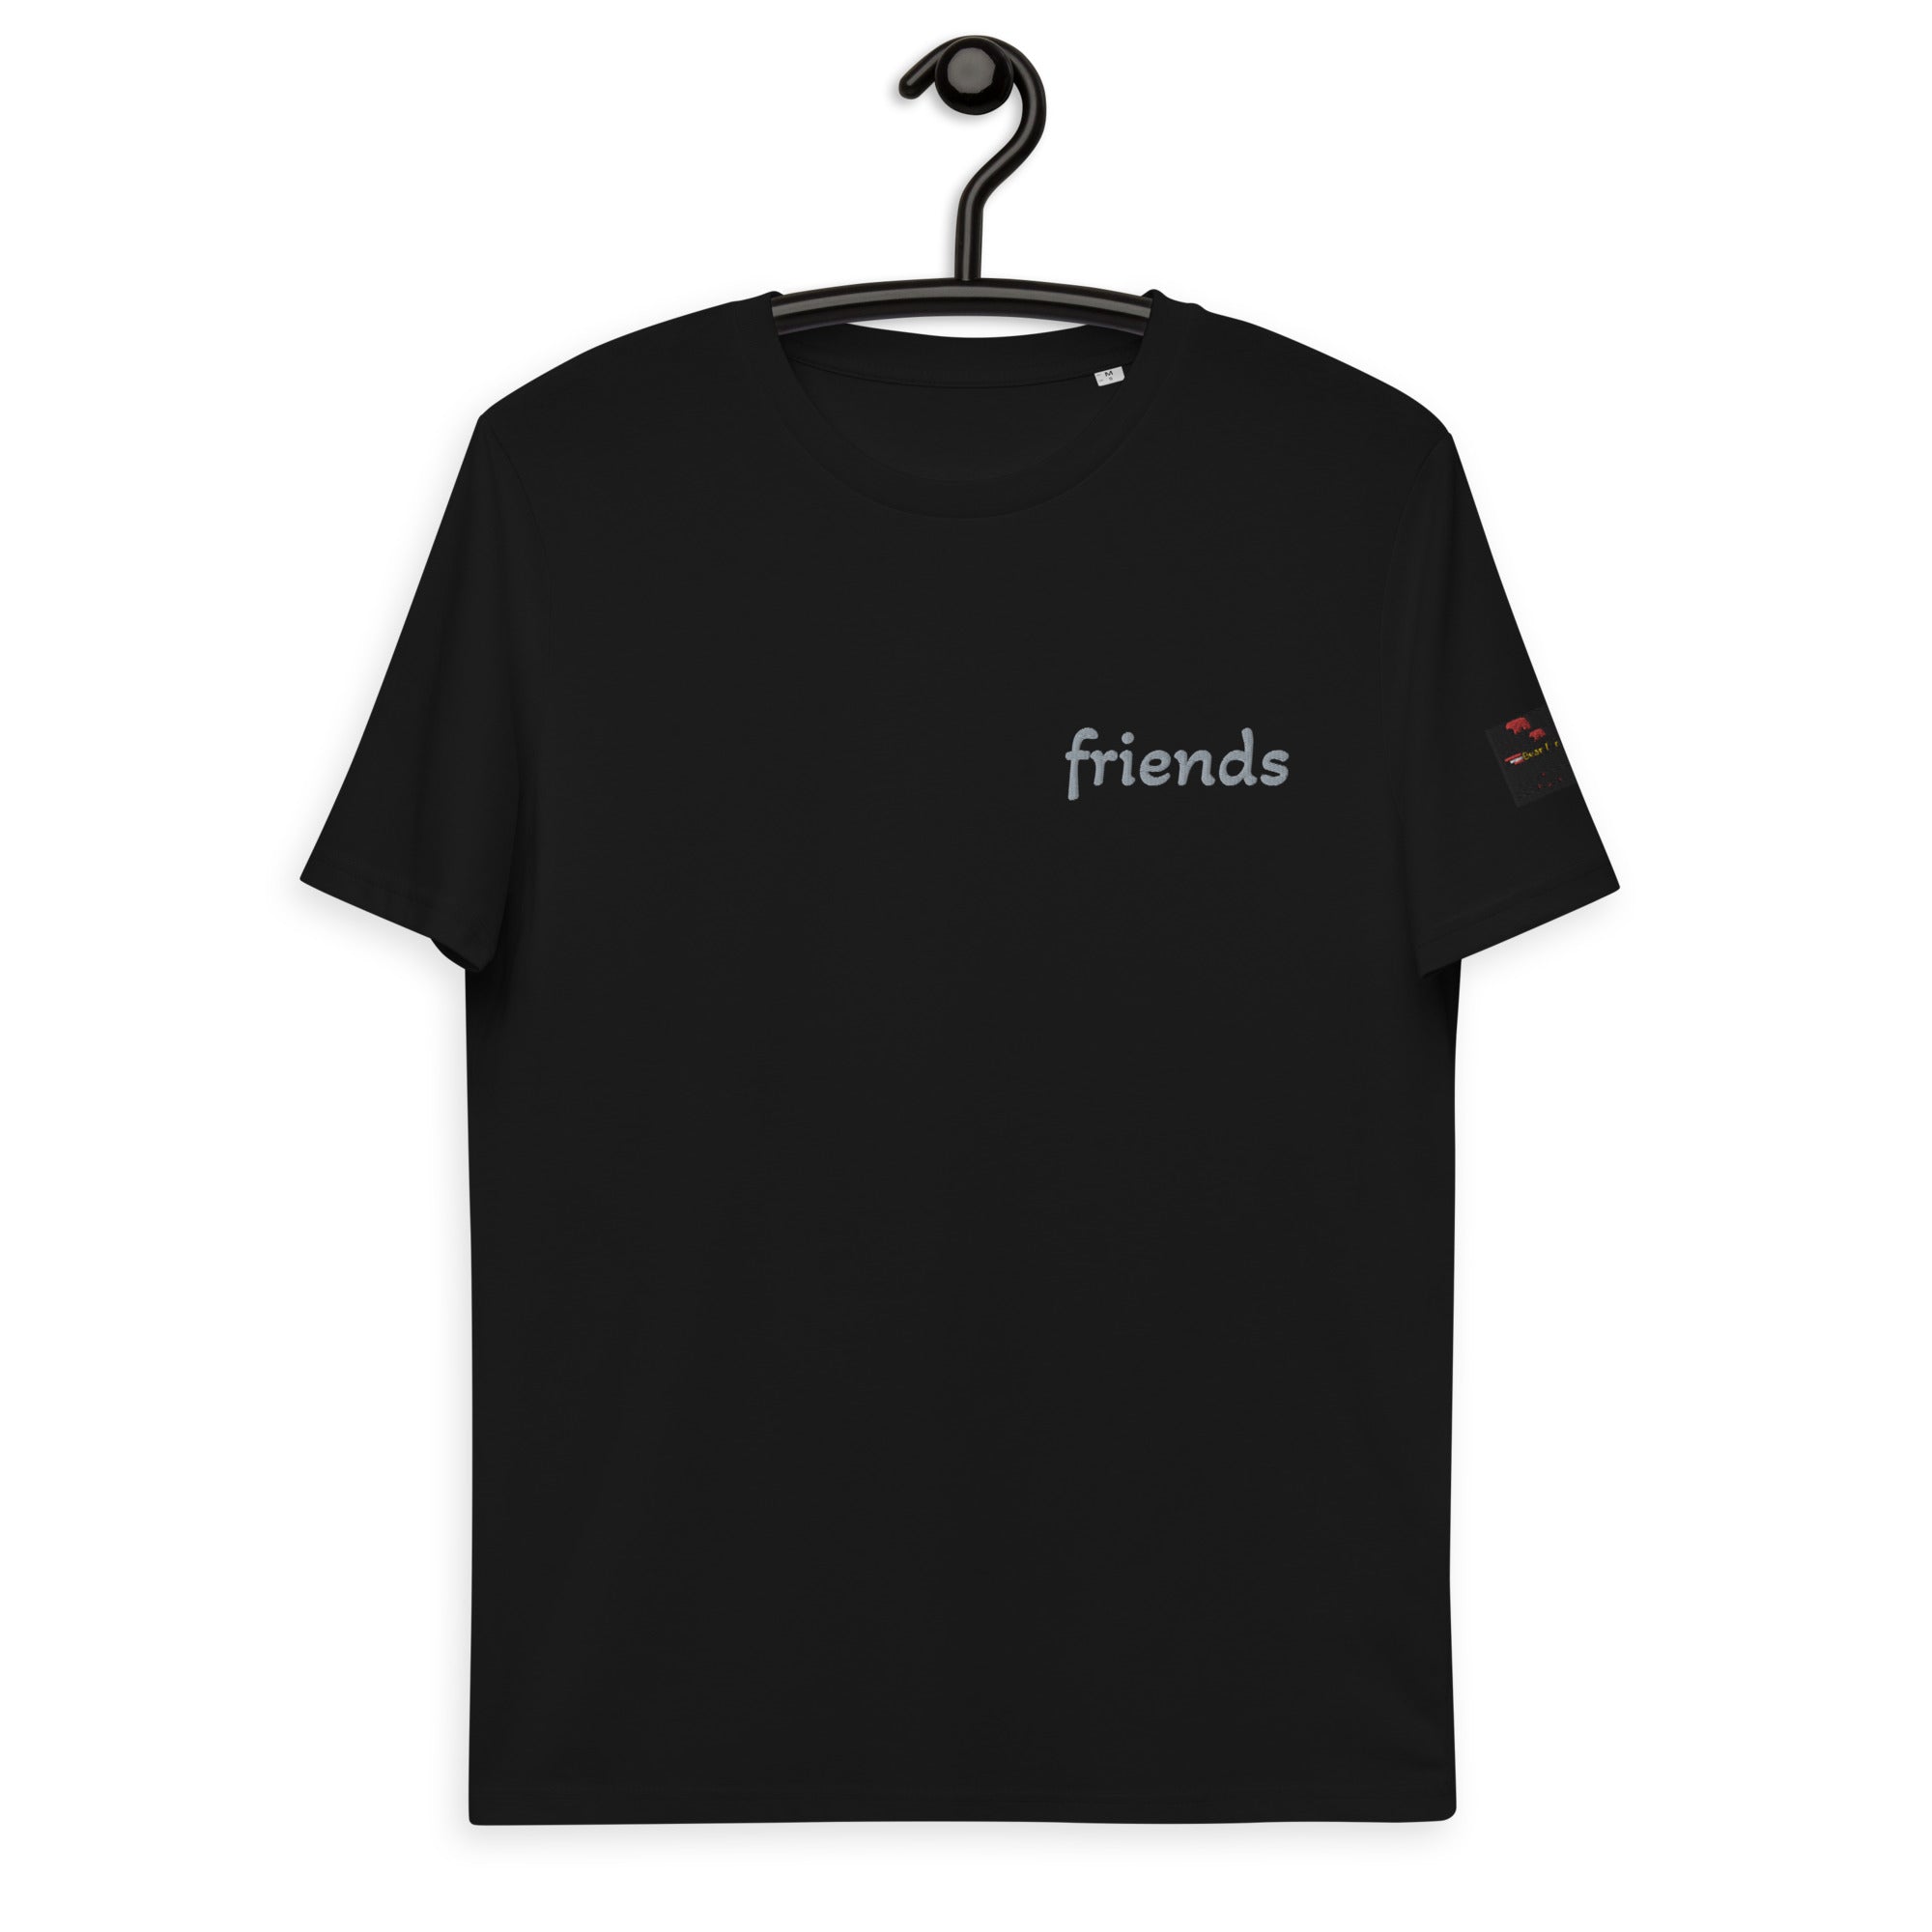 Eco-friendly organic "friends" t-shirt (For customers wishing to dress stylishly and fashionably.